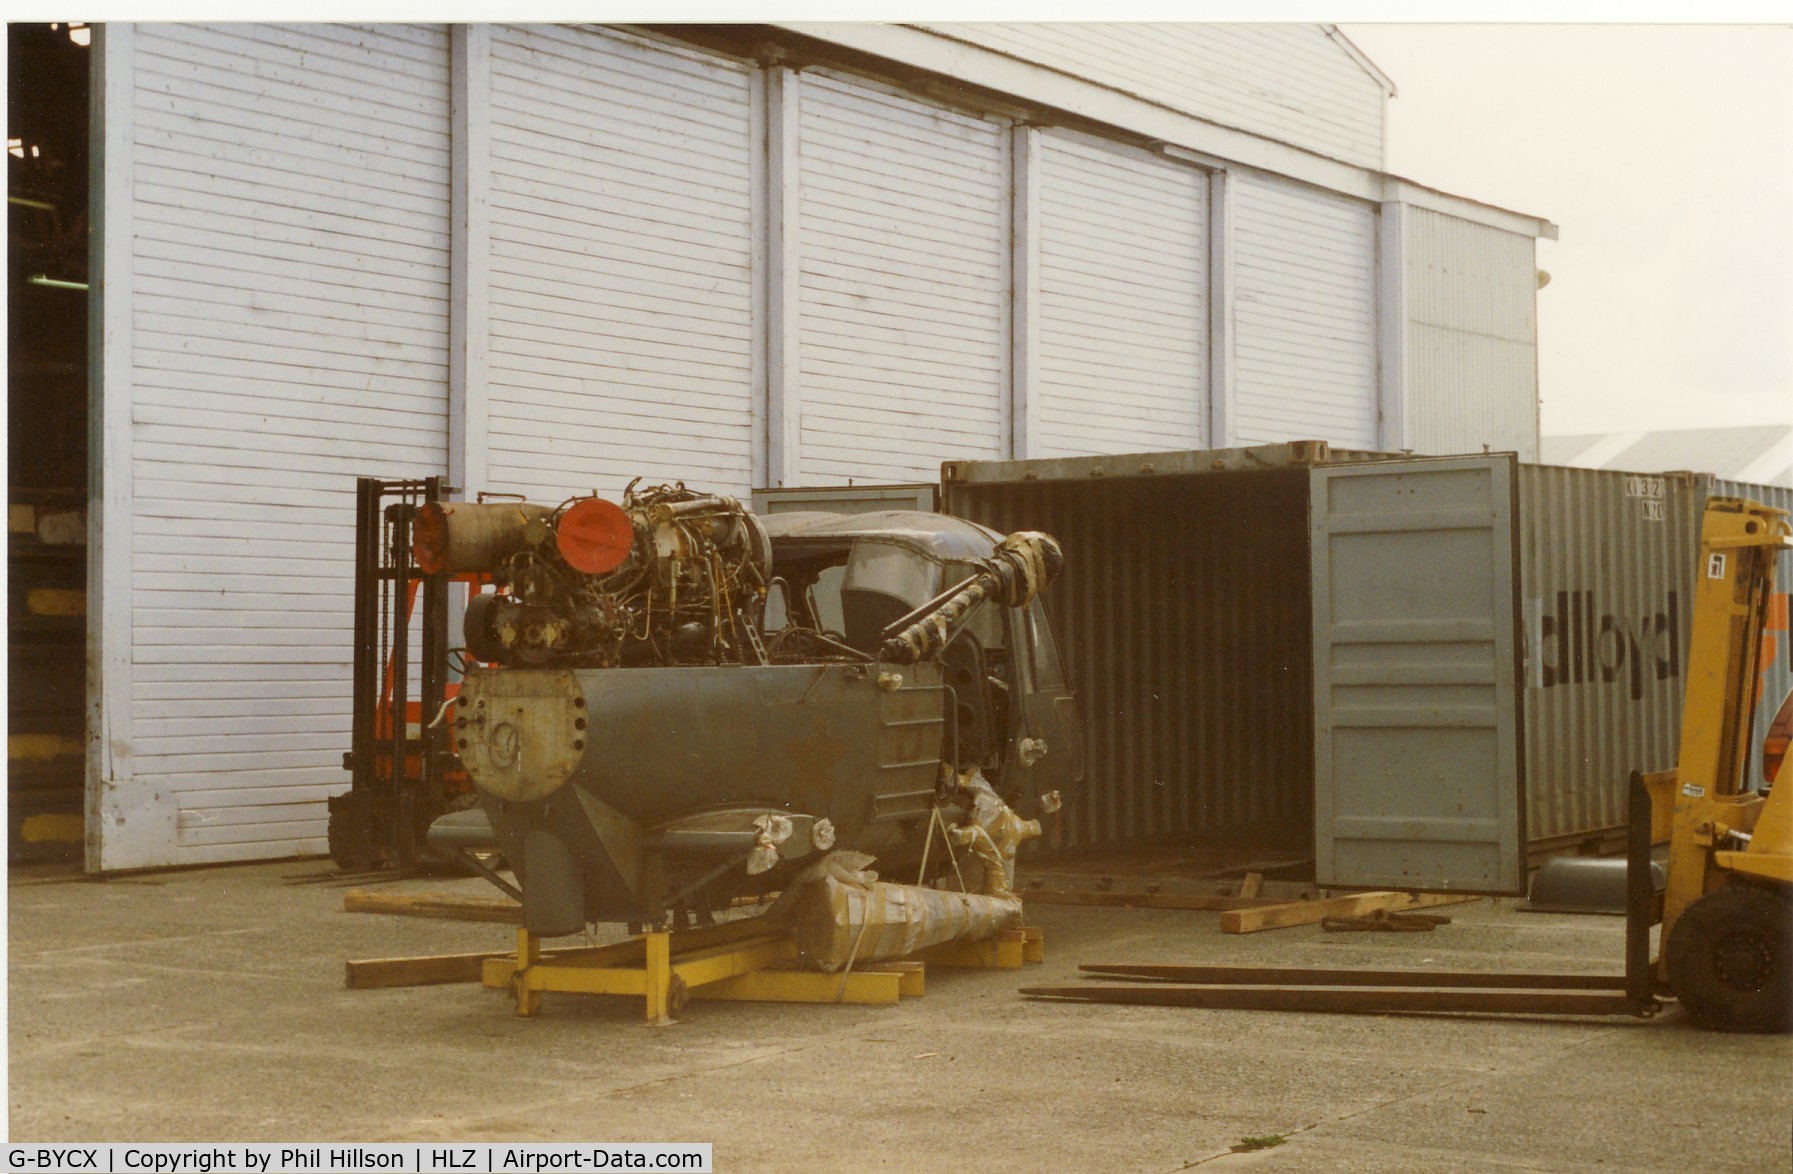 G-BYCX, 1973 Westland WASP MK1B C/N F9754, Unloading from the container for South Africa